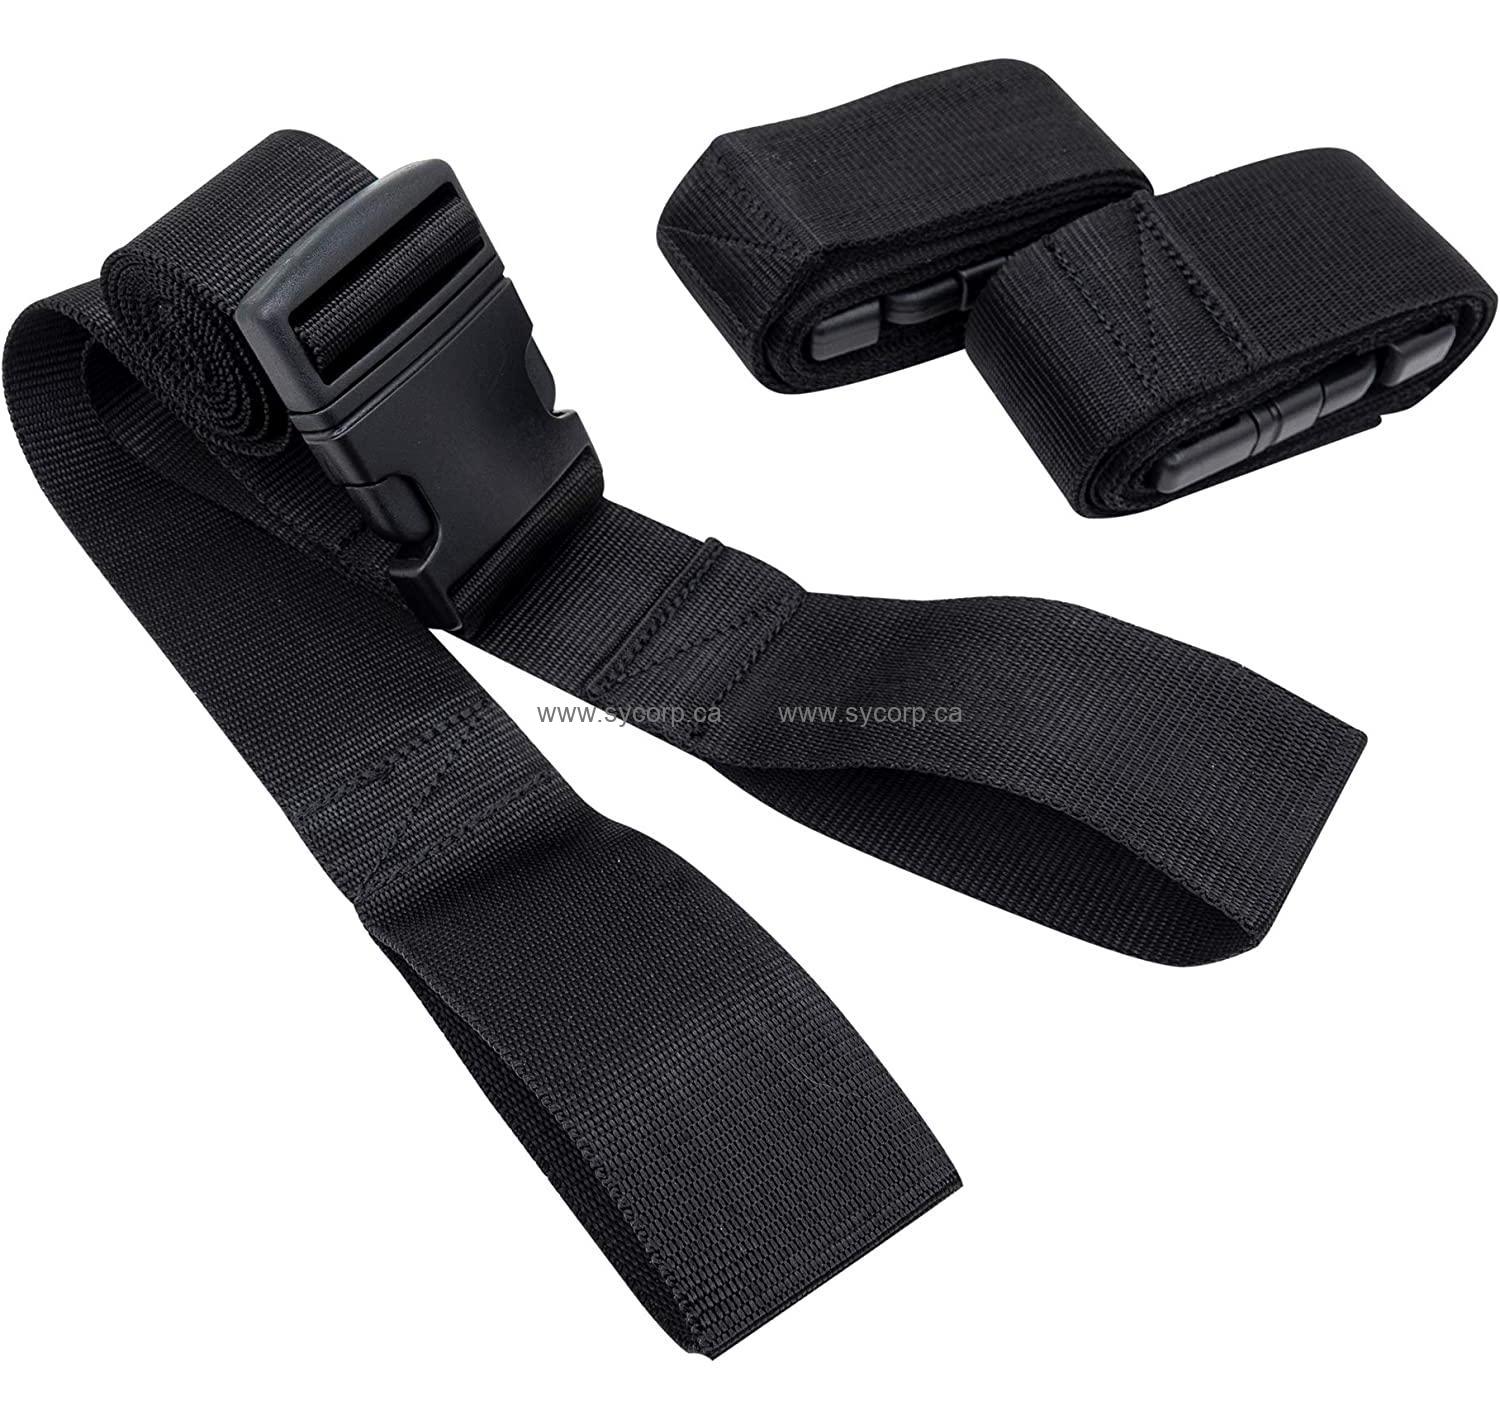 Spine Board Straps, With Plastic Buckle, For Stretcher, 6ft, Set